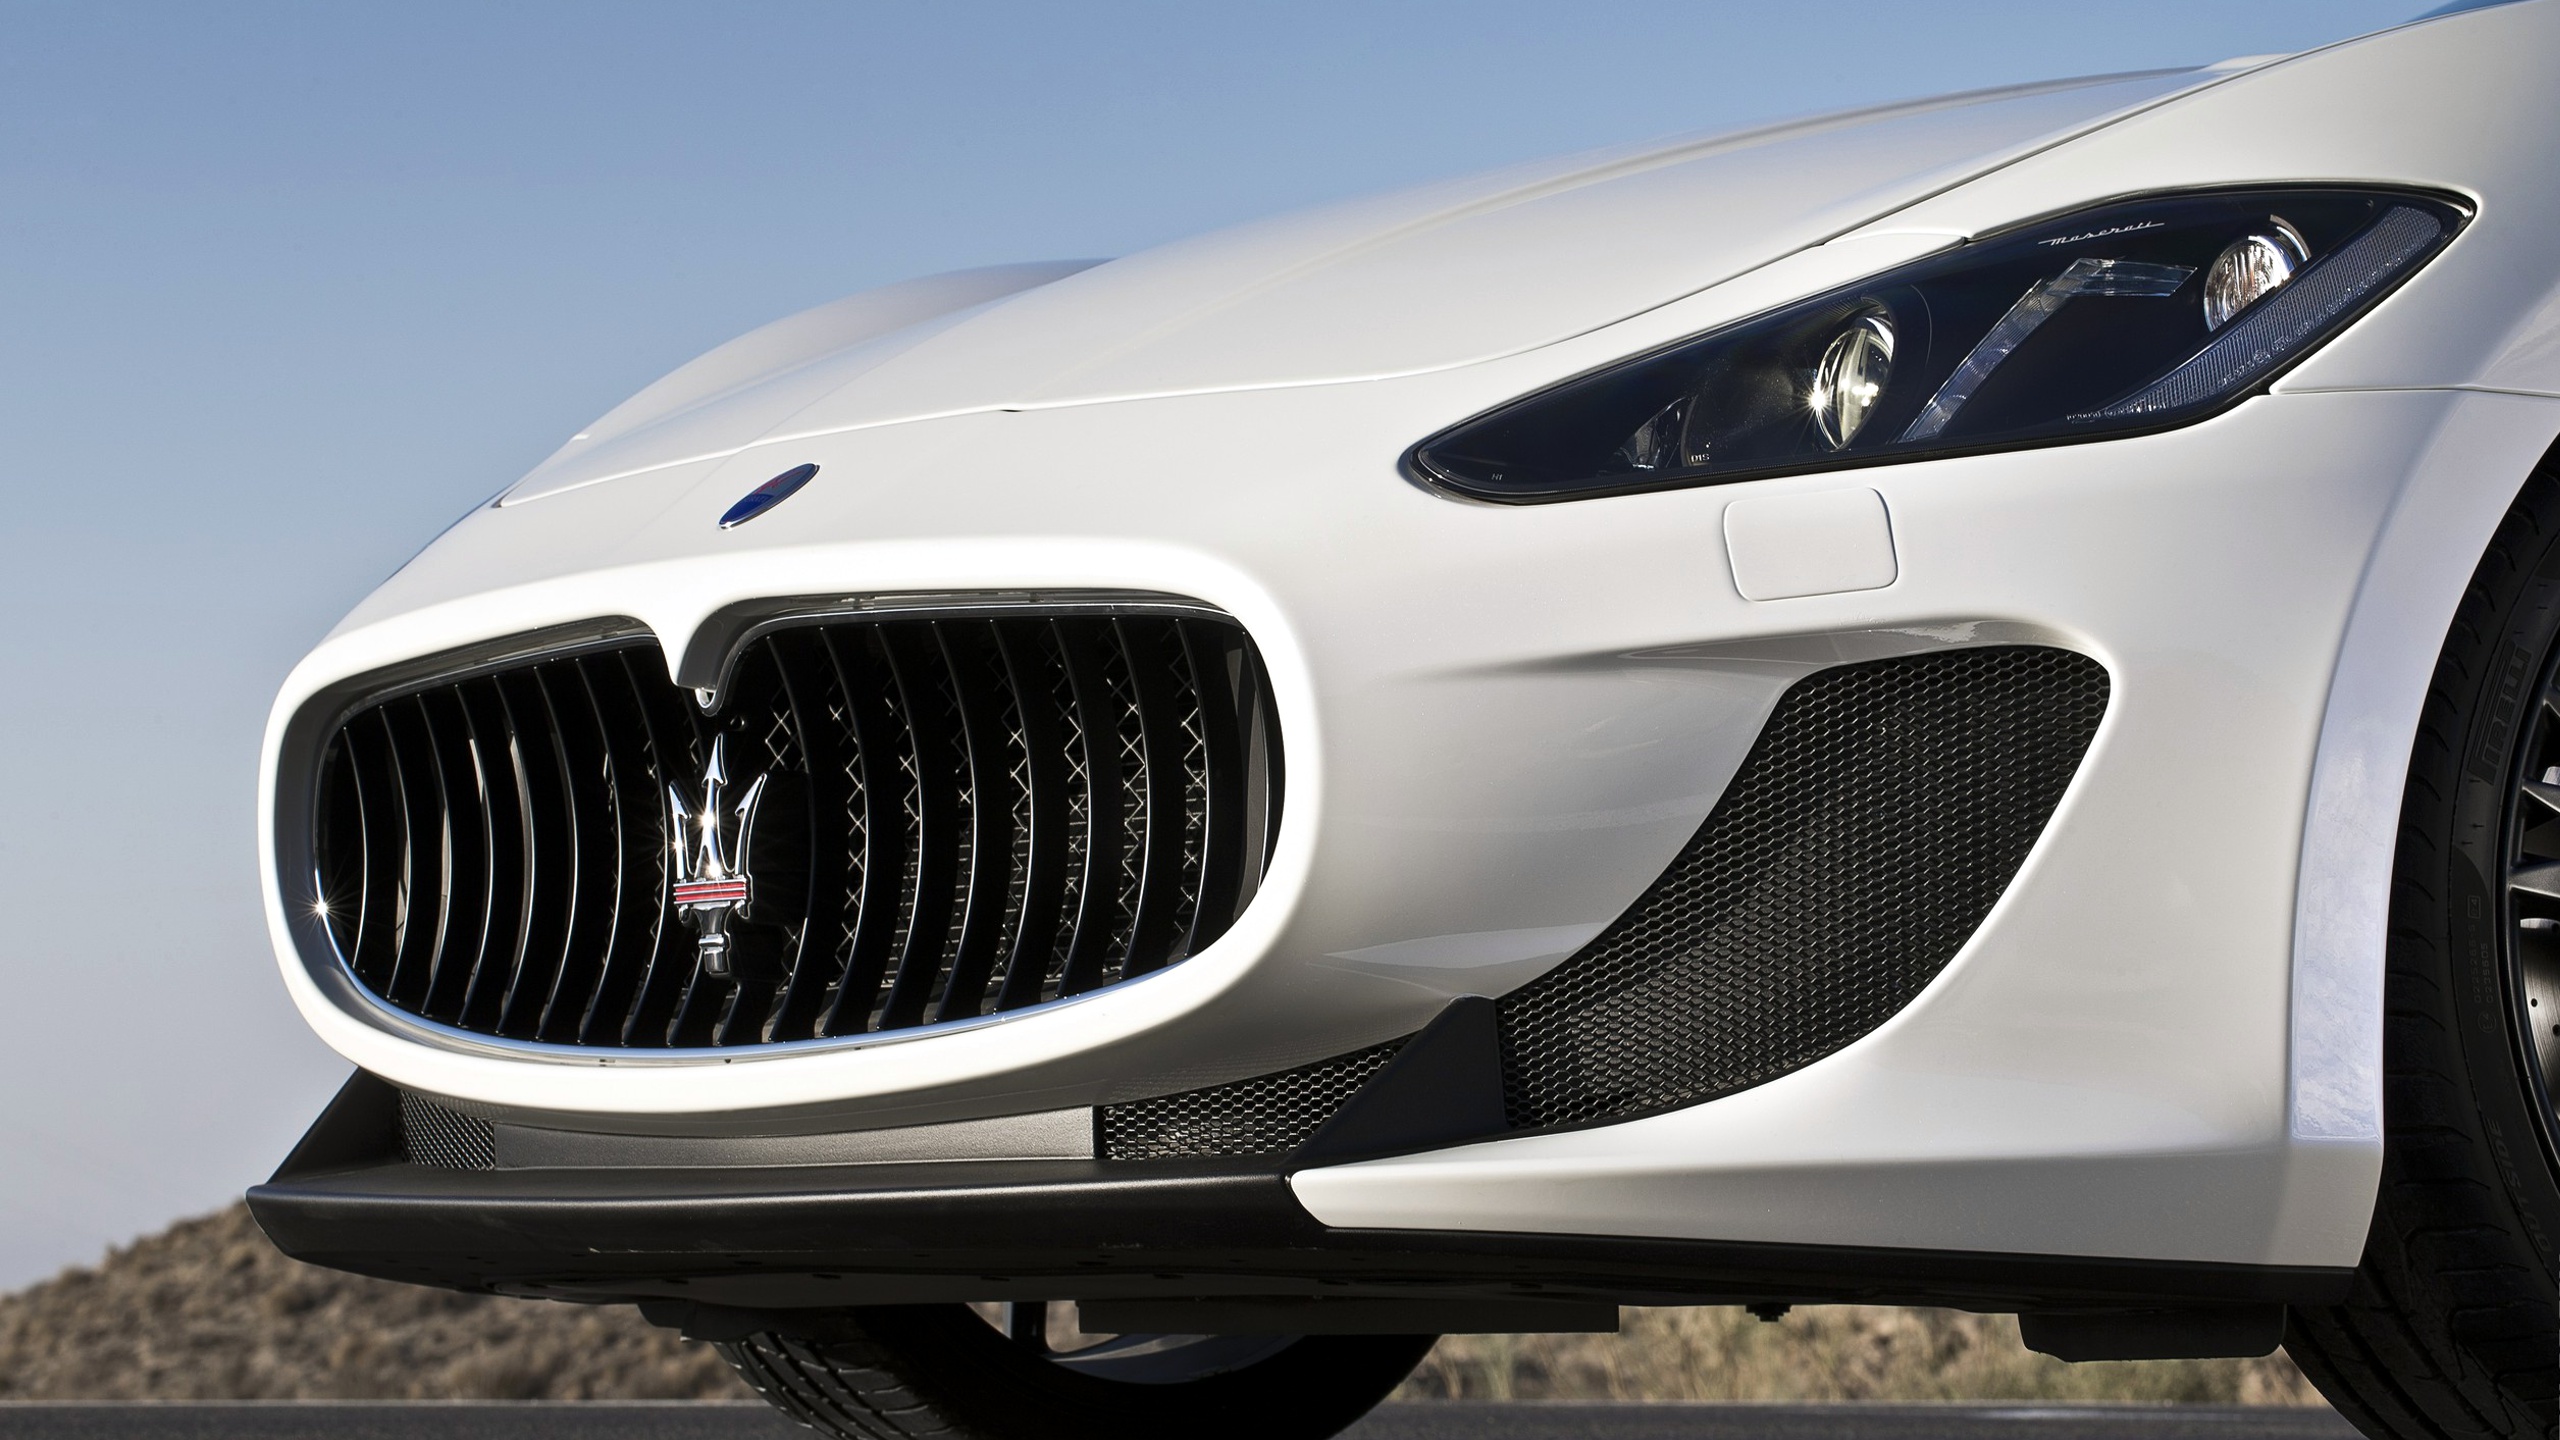 Maserati On HD Wallpaper Background For Your Desktop All